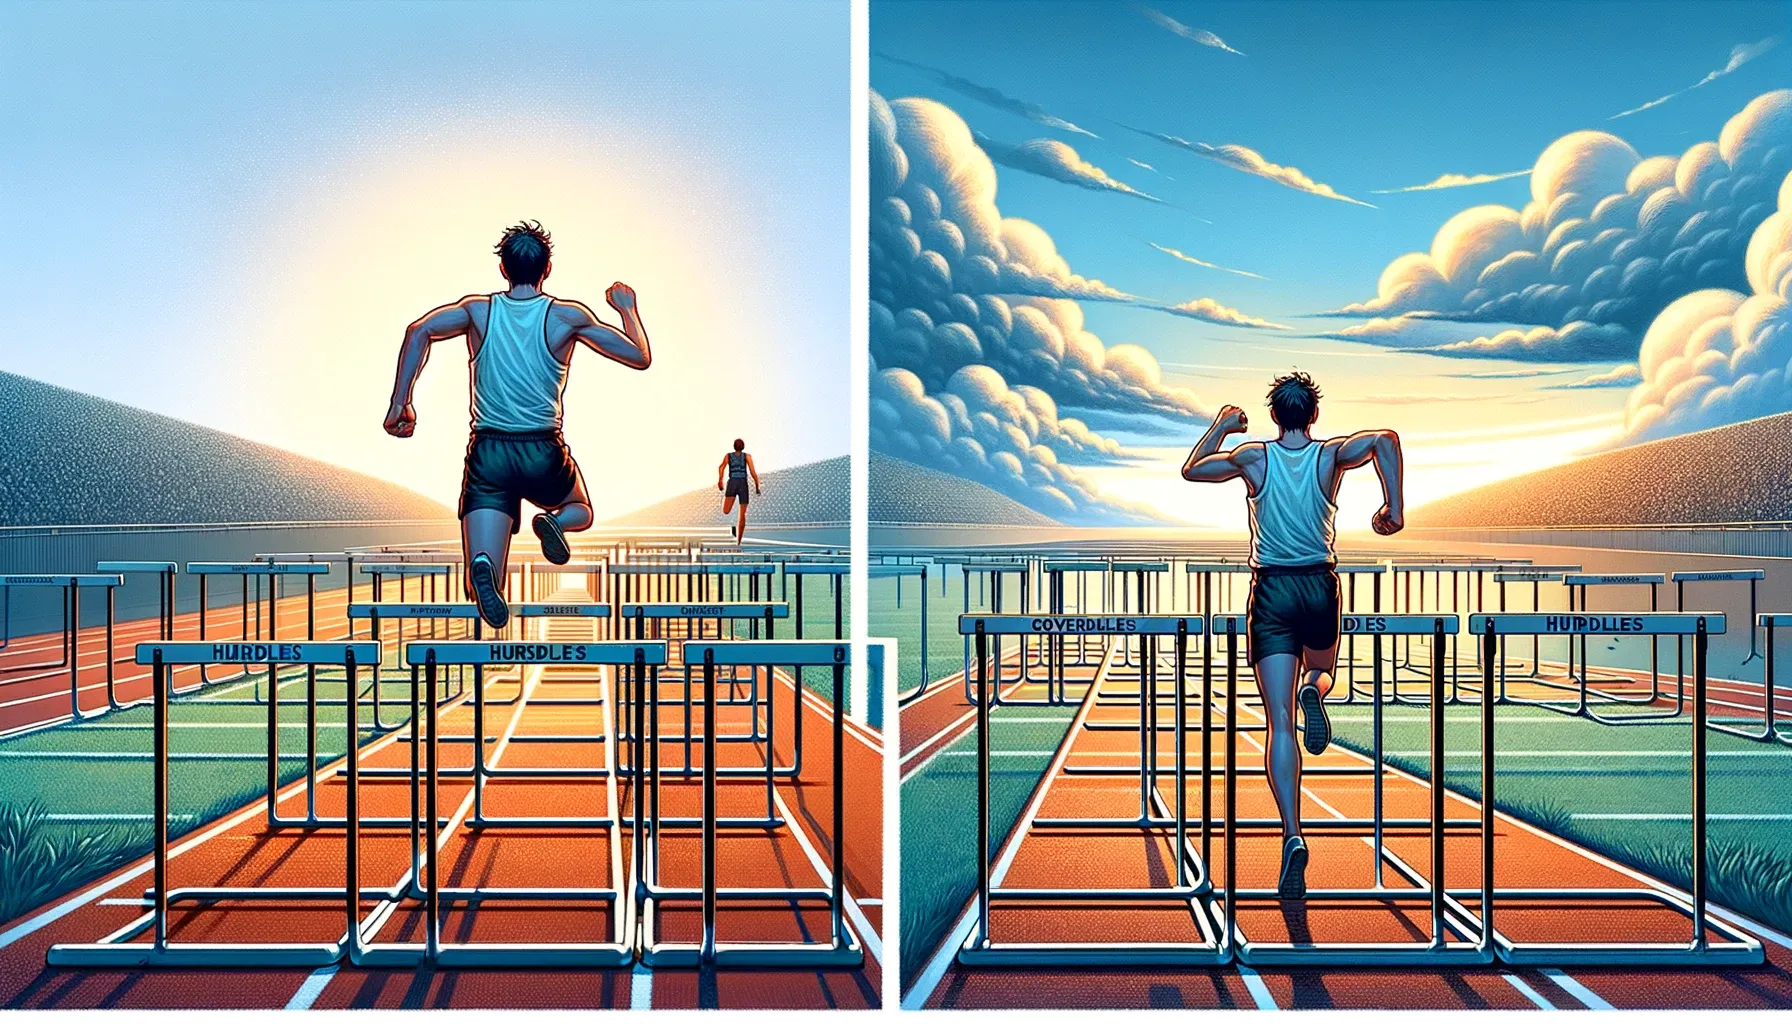 DALL·E 2024-01-24 00.55.25 - Two scenes, side by side, illustrating the metaphor of overcoming hurdles. In the first scene, depict a runner who has effortlessly overcome a very hi.png